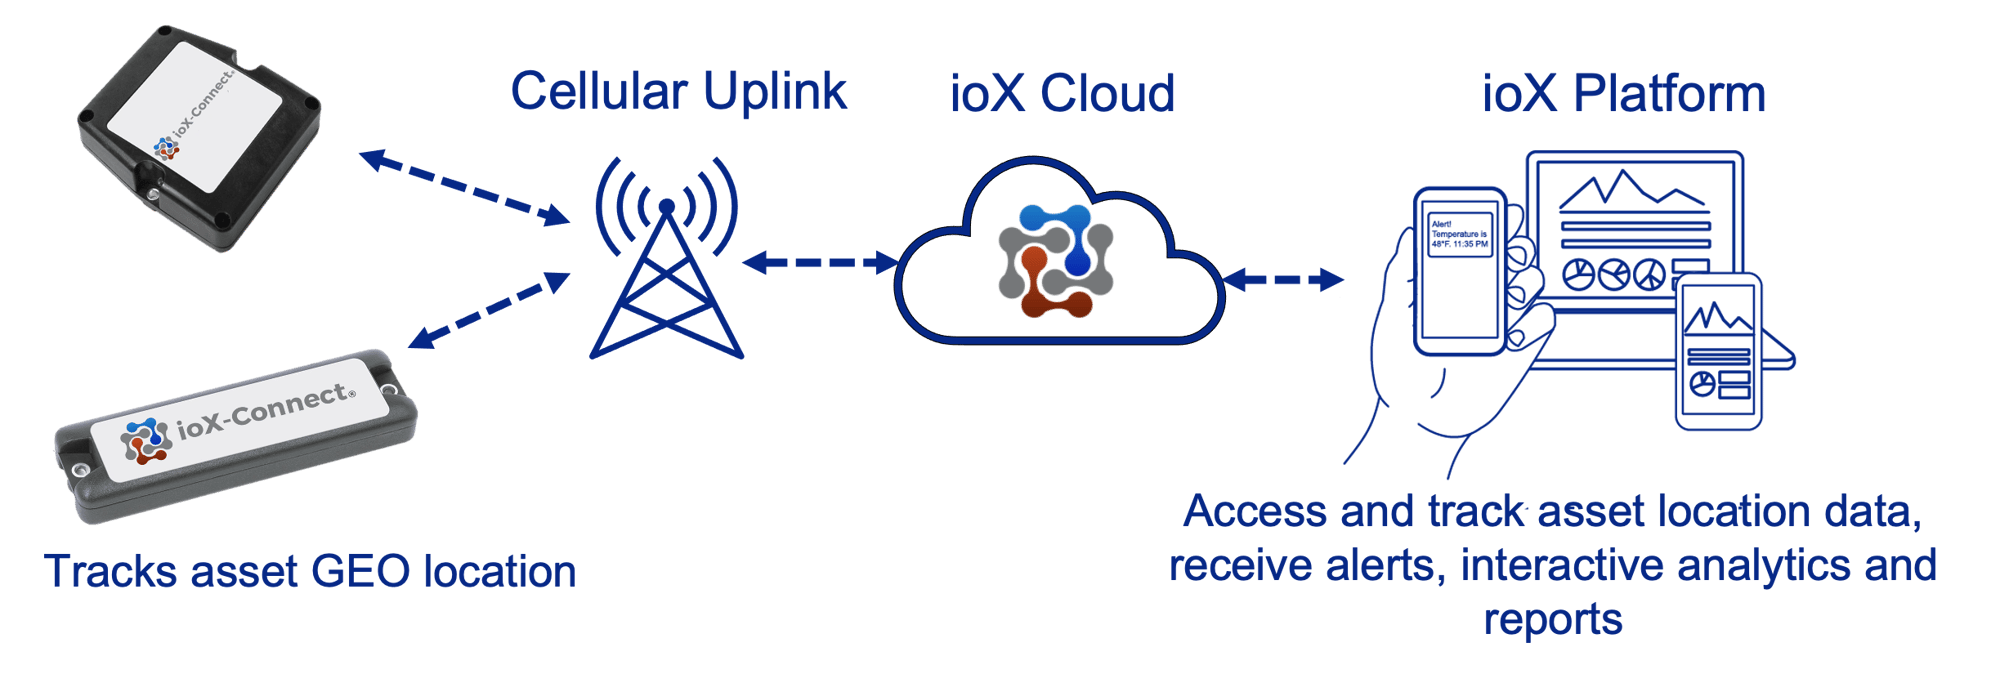 How Asset Tracking Works ioX-Connect